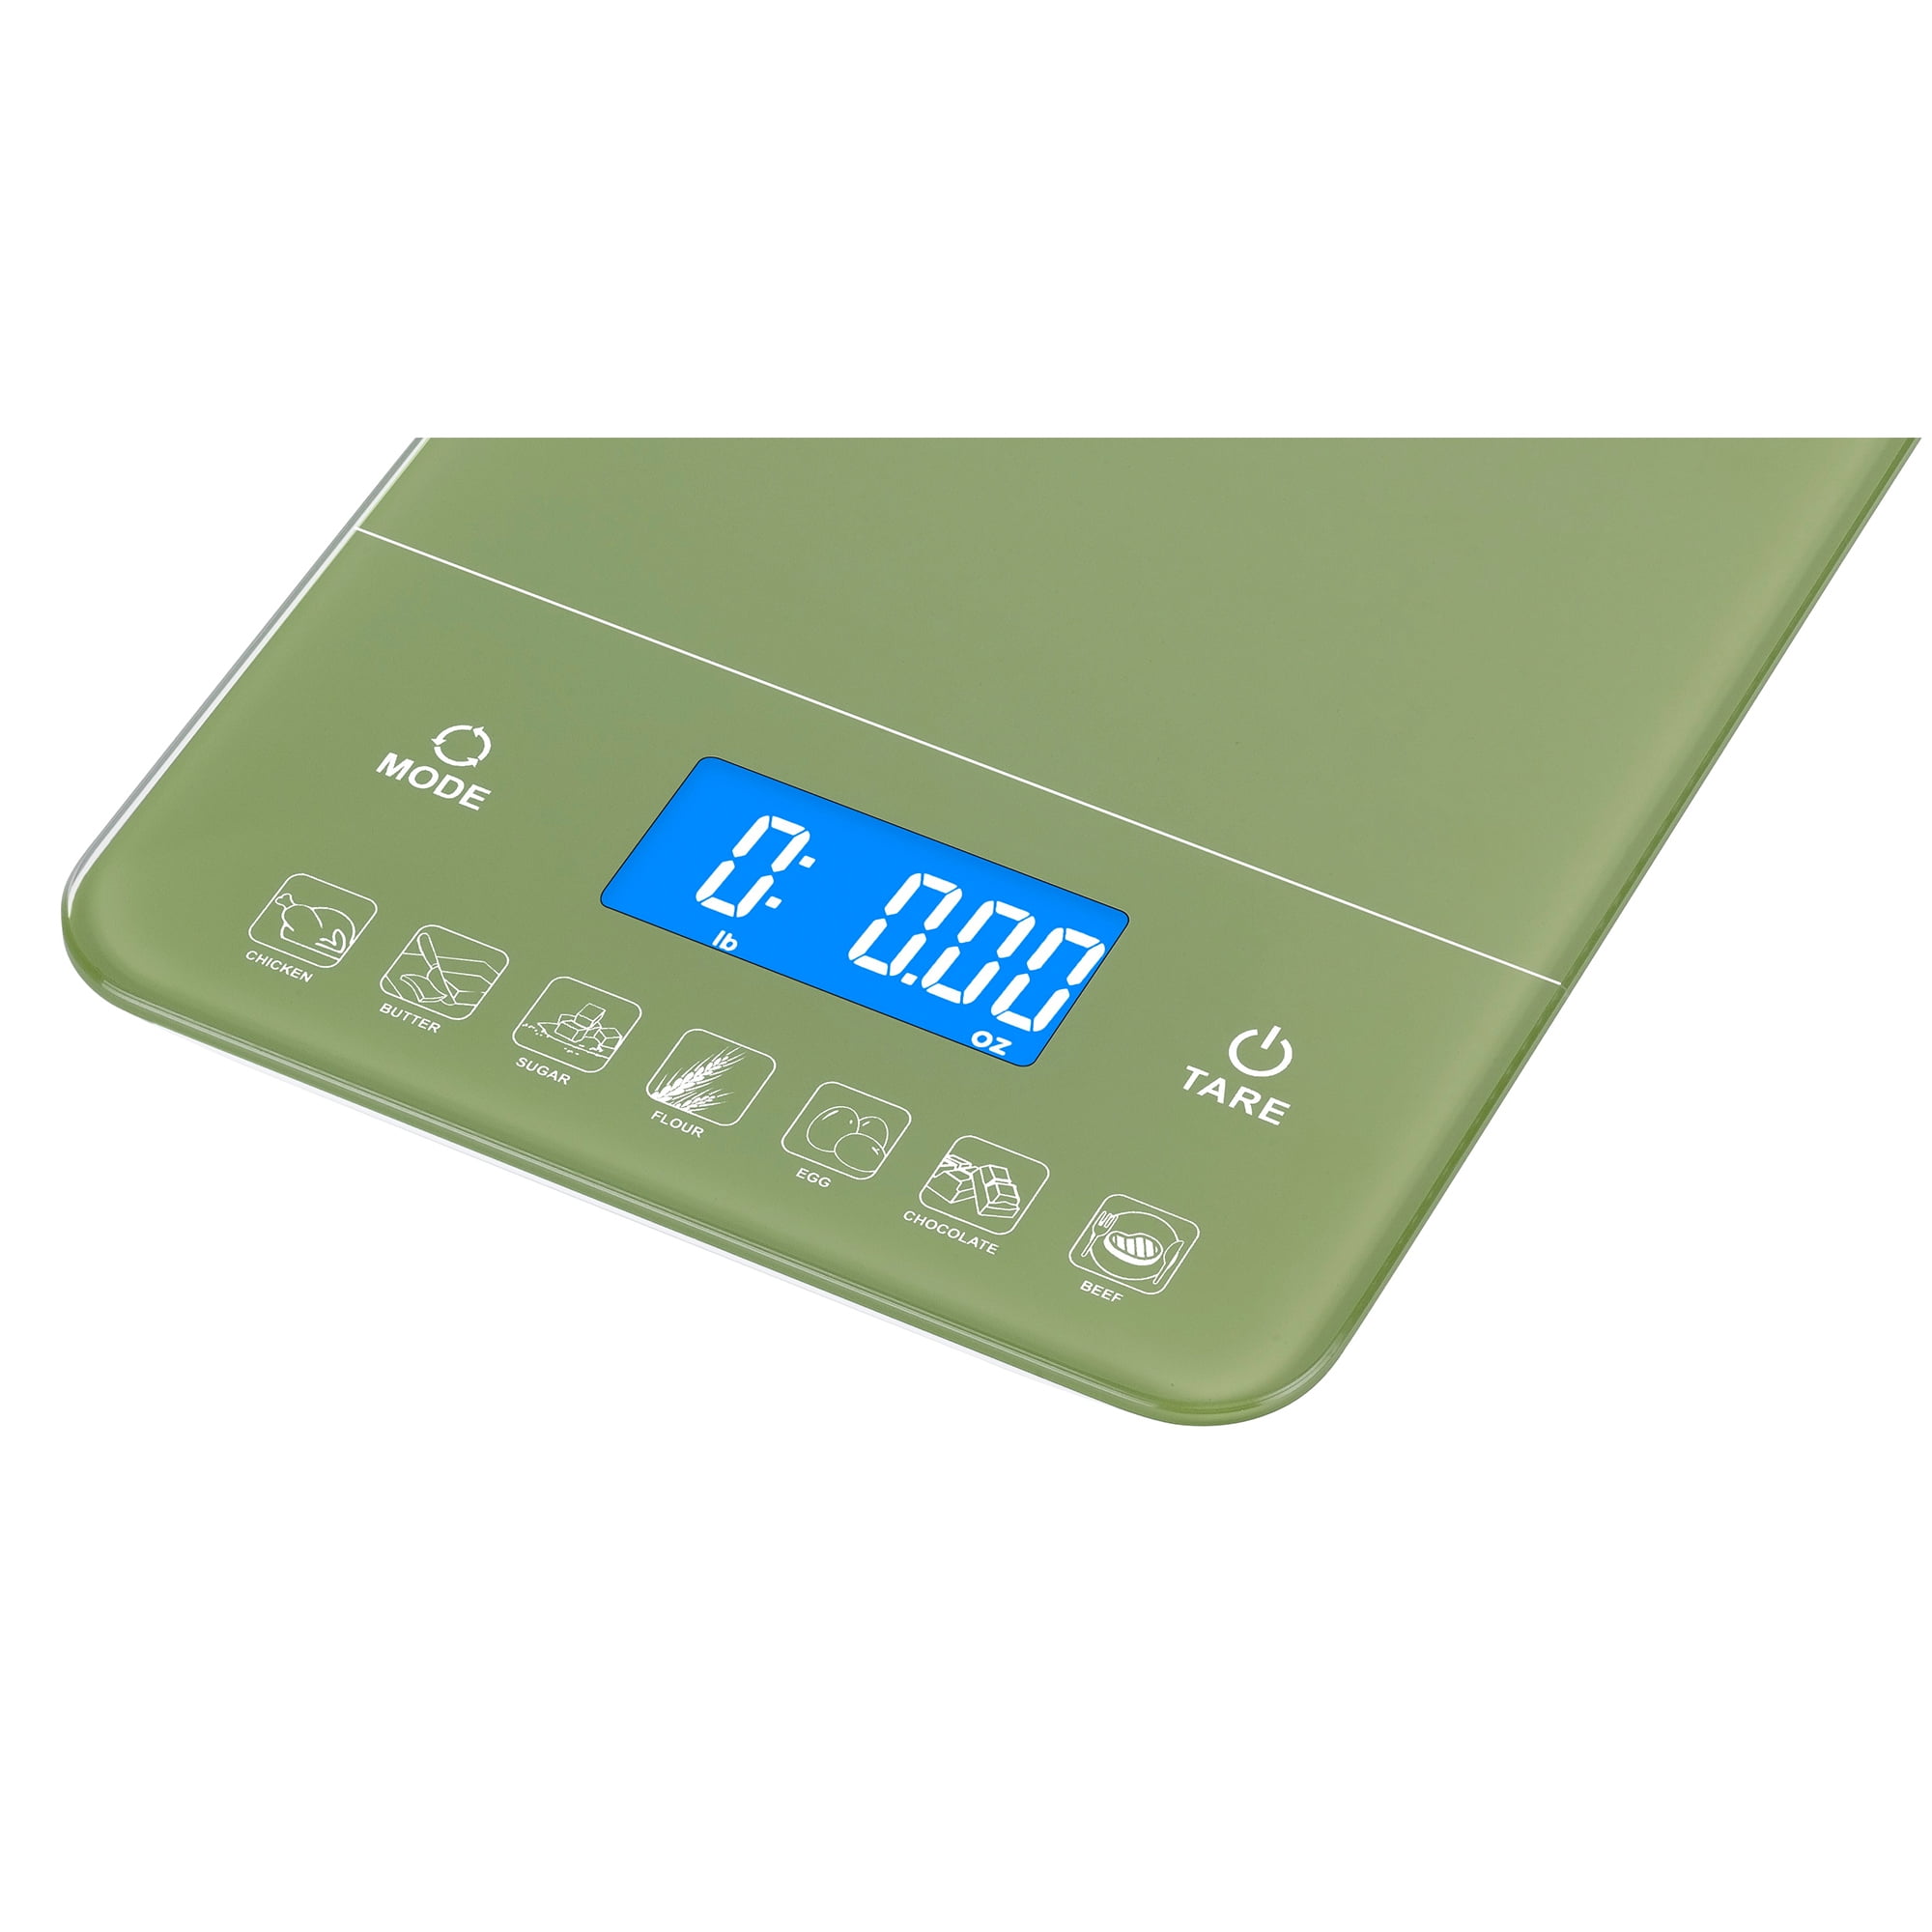 Ozeri Touch III 22 lbs (10 kg) Baker's Kitchen Scale with Calorie